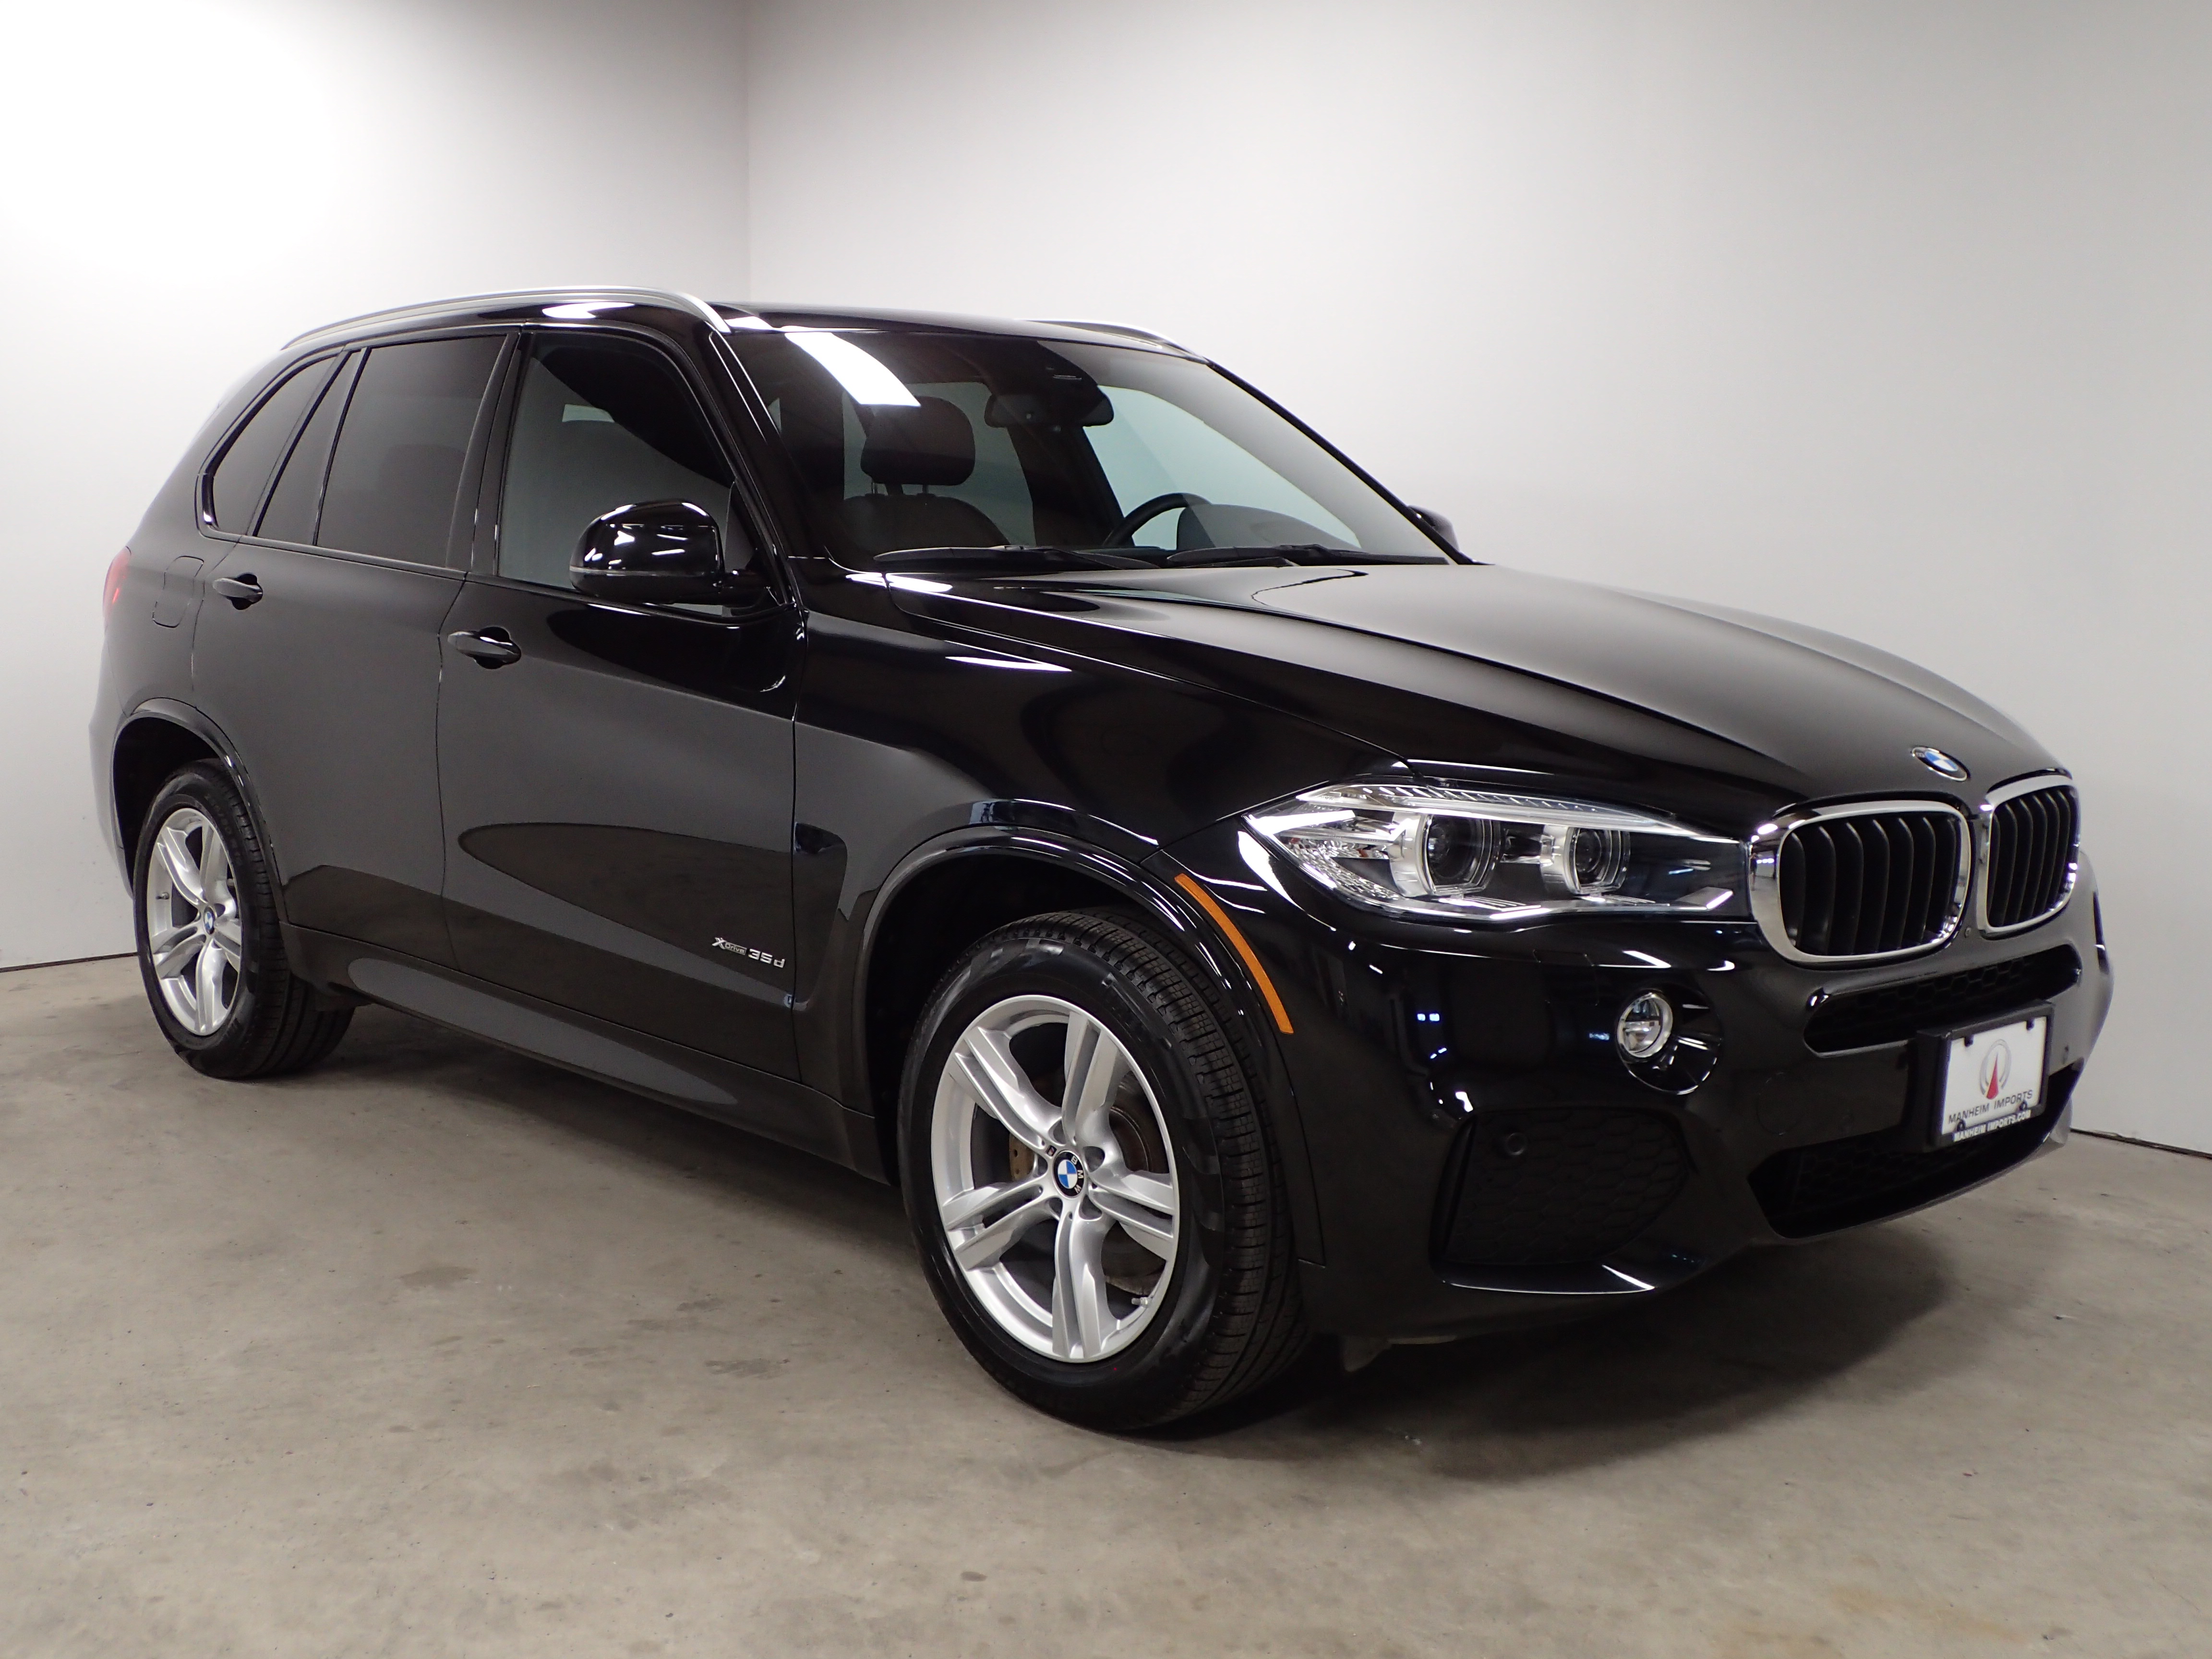 PreOwned 2016 BMW X5 xDrive35d M Sport Sport Utility in